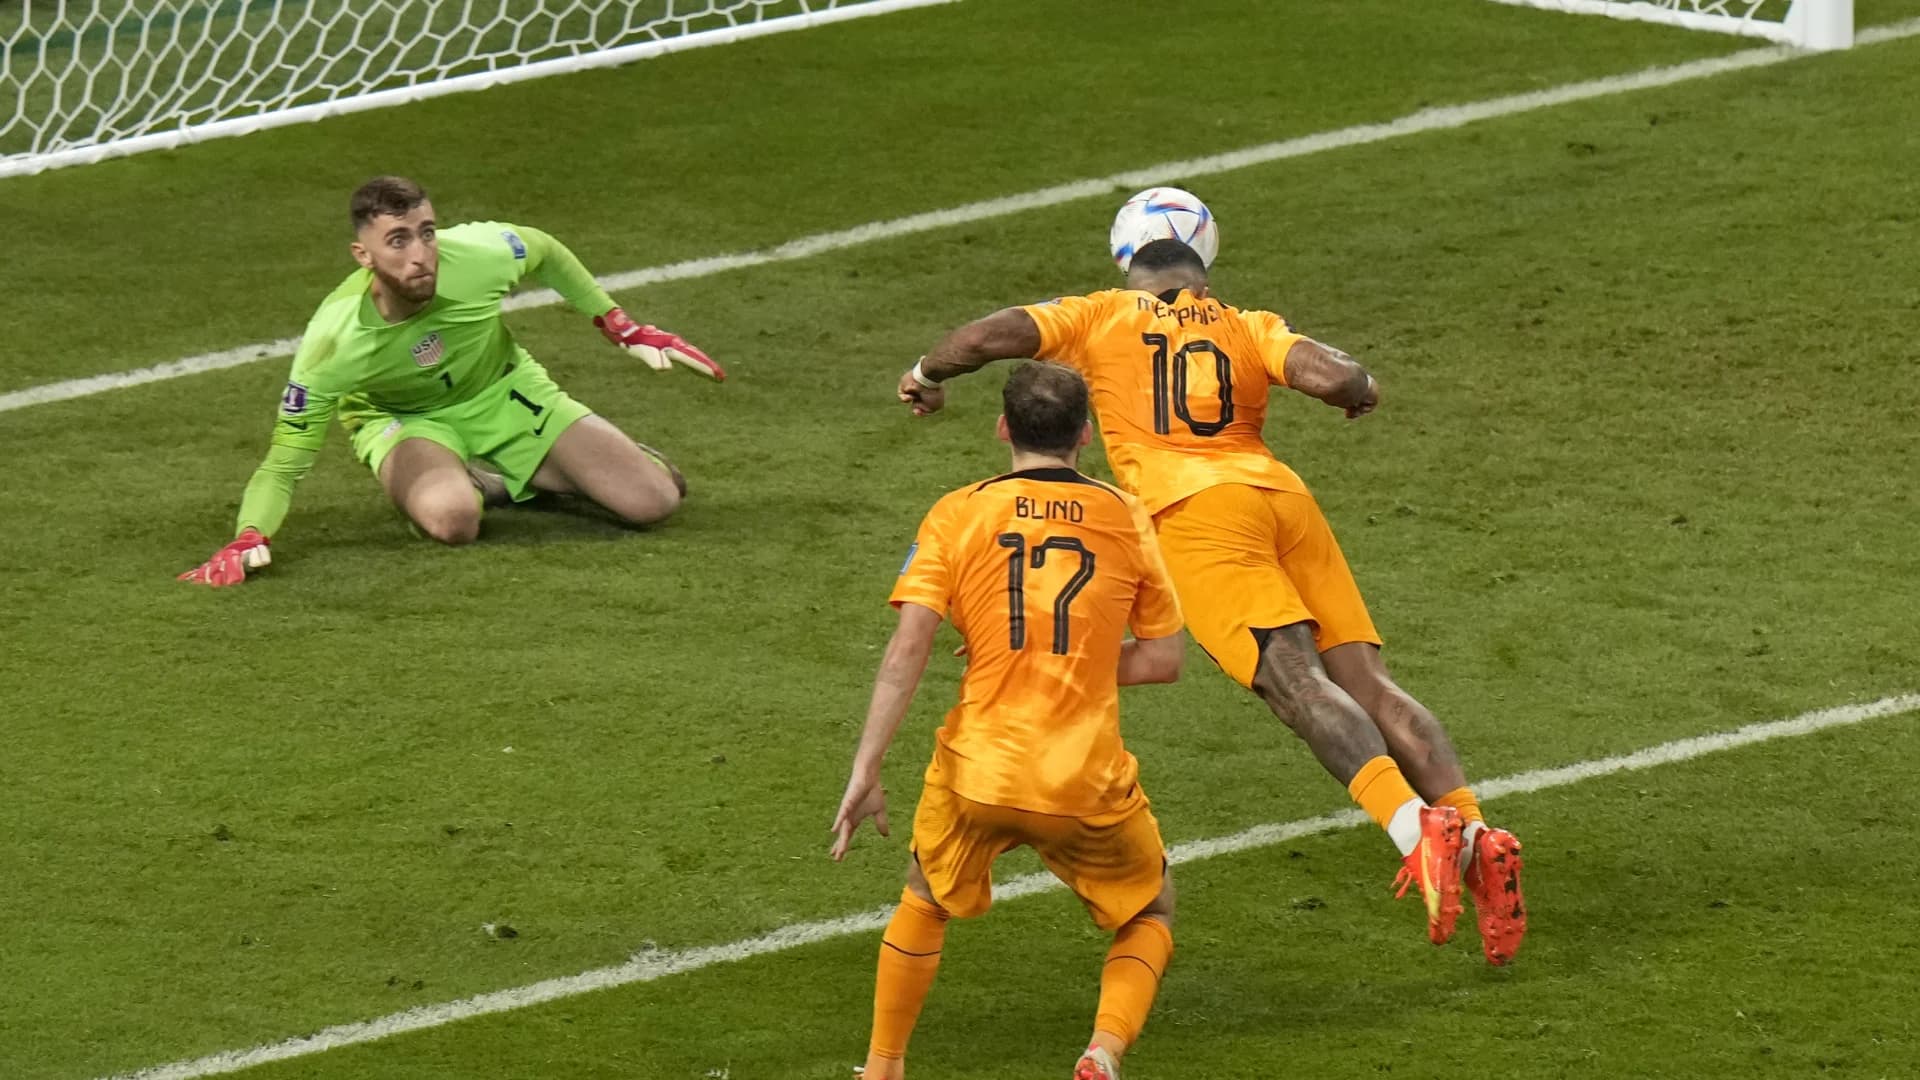 US knocked out of World Cup, loses to the Netherlands 3-1